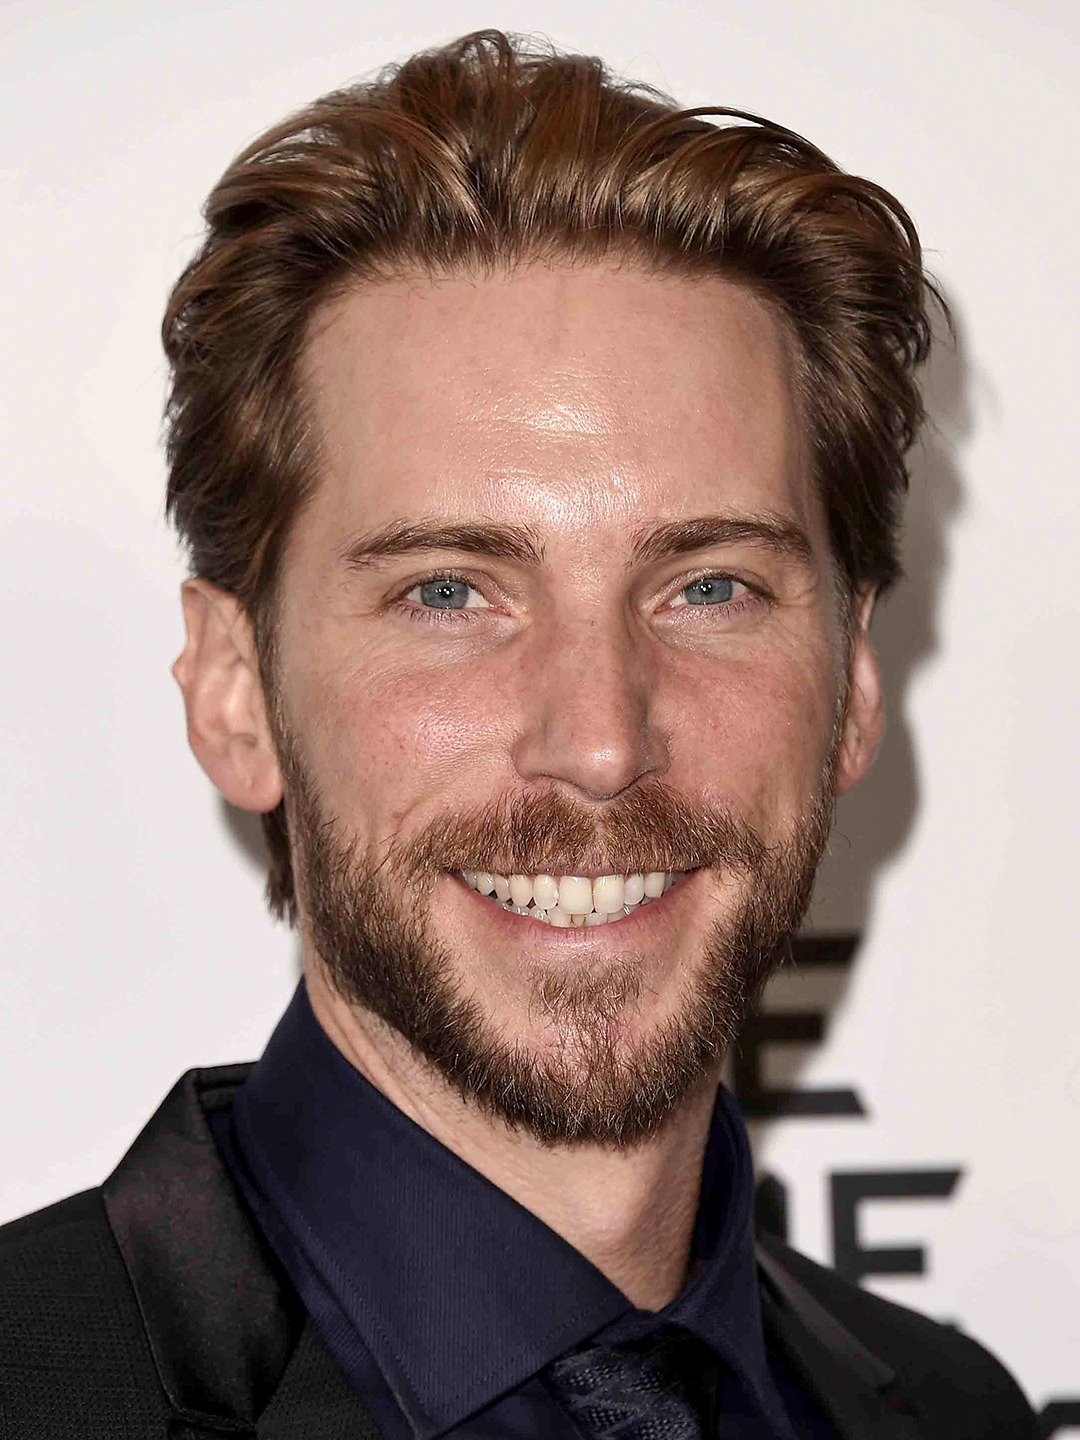 Rhode Island Comic Con - #VOICEOVERWEEK is almost over! Please welcome Troy  Baker to #RICC2016! Troy is an American voice actor and musician known for  portraying lead characters in several video games.